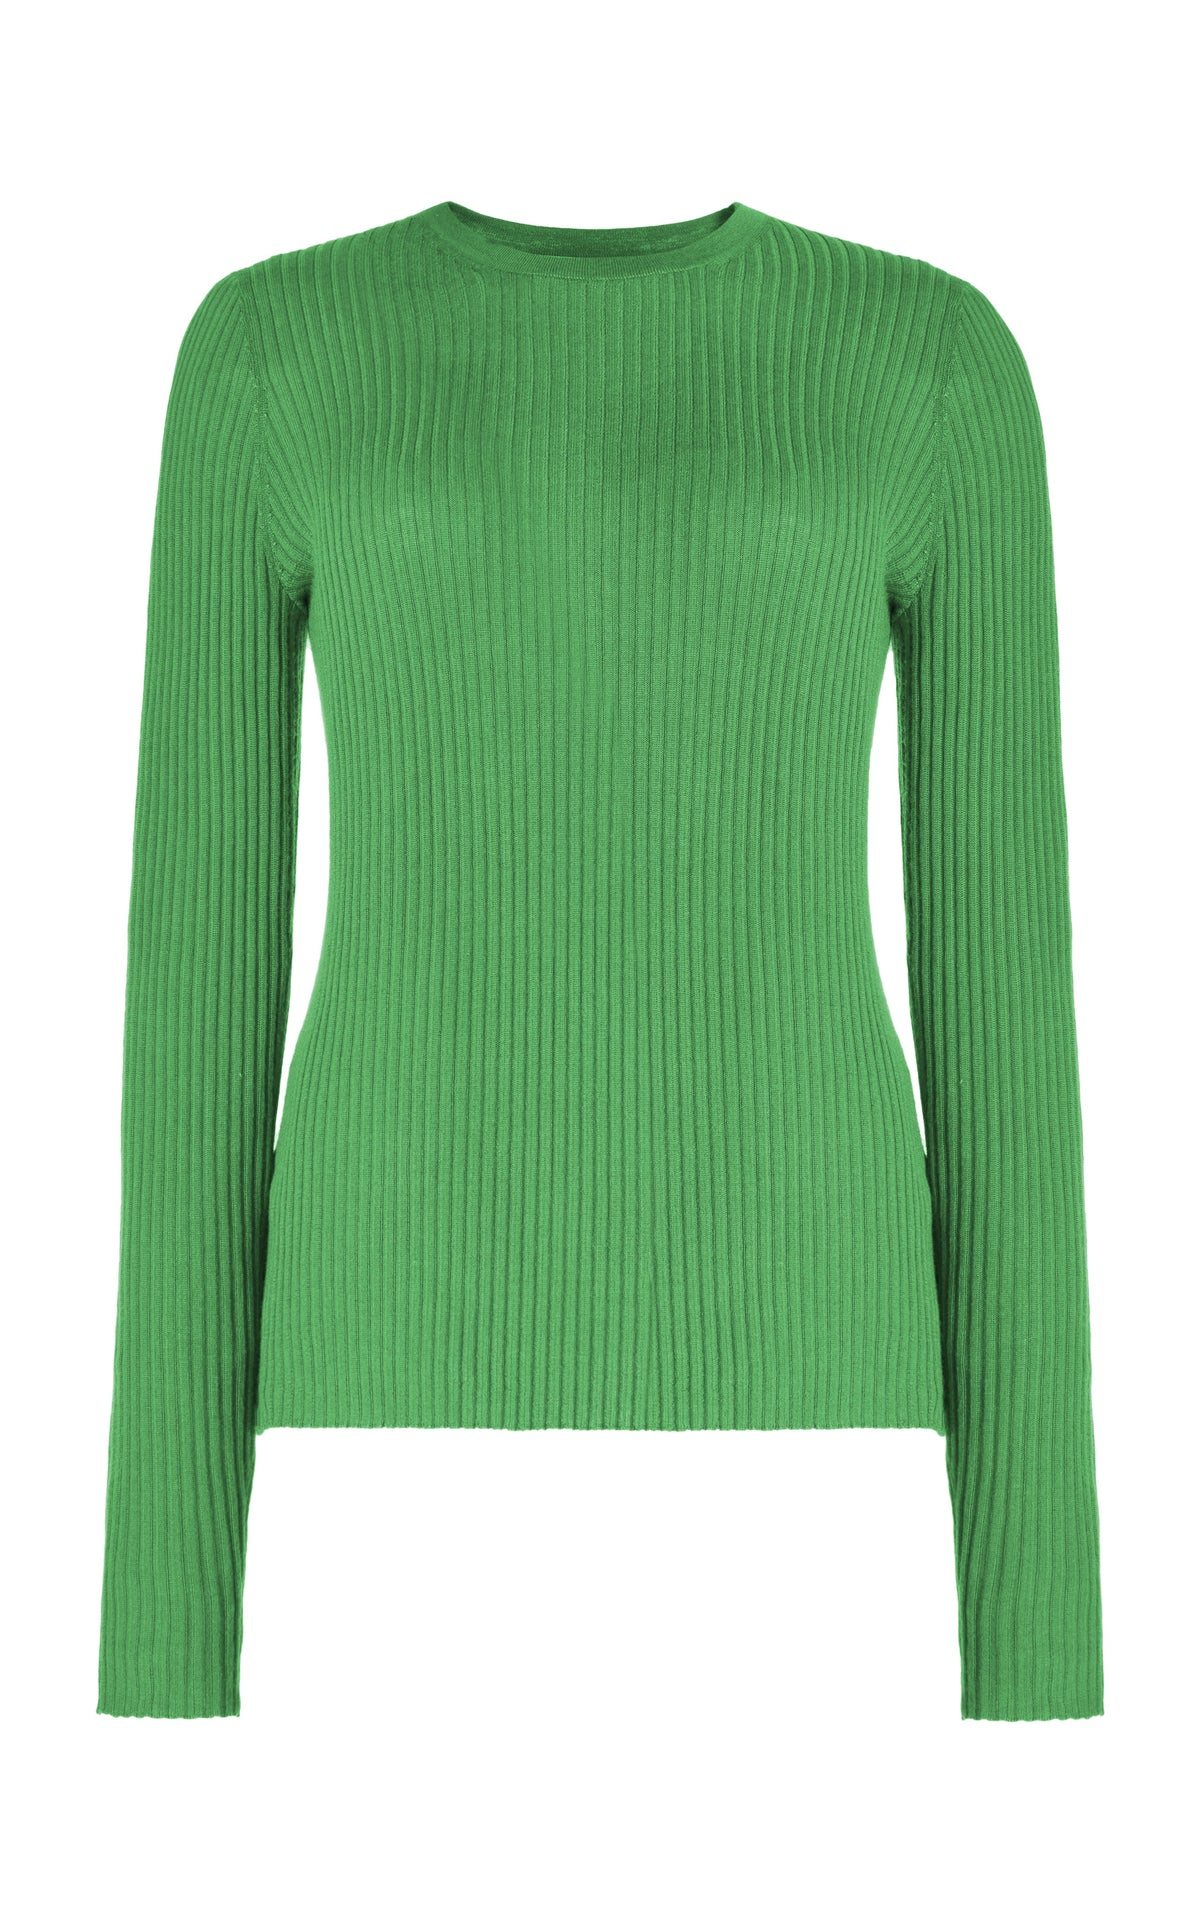 Browning Knit in Silk Cashmere